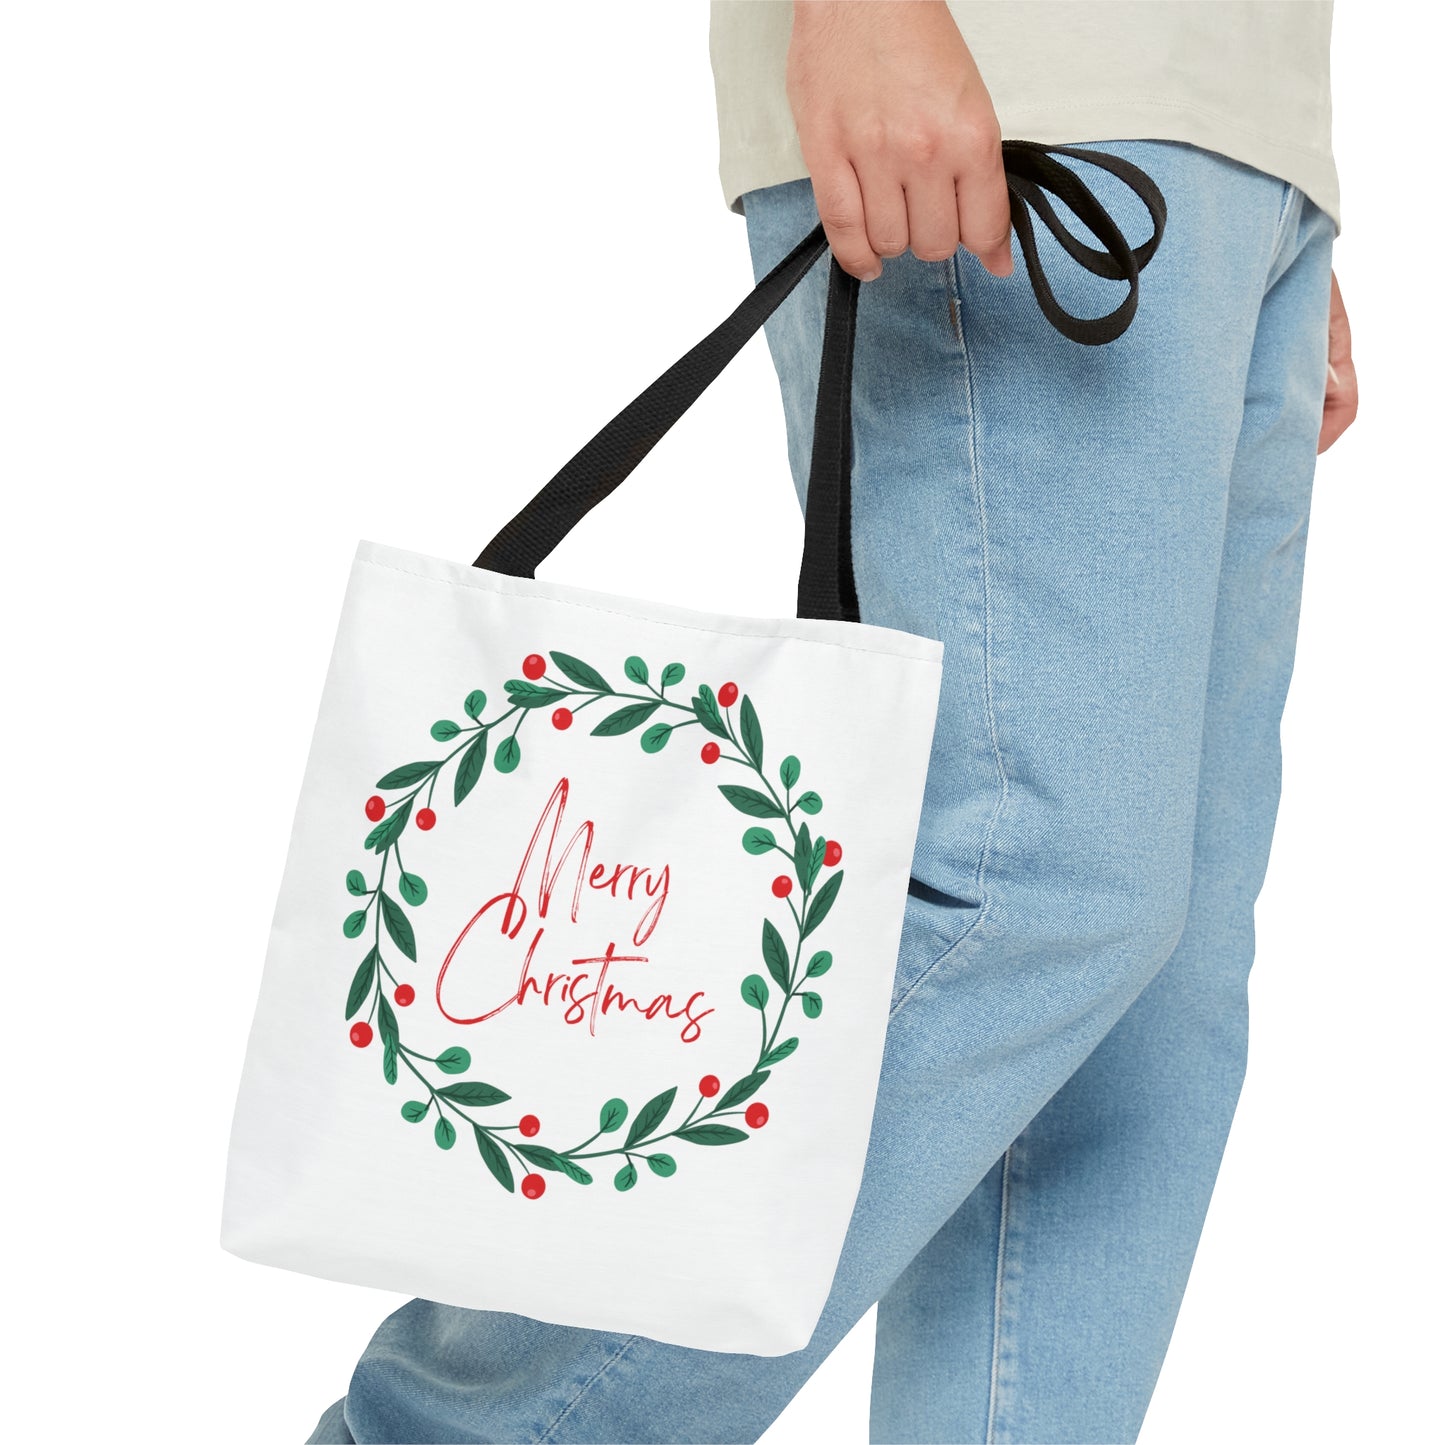 Merry Christmas Printed Canvas Tote Bags